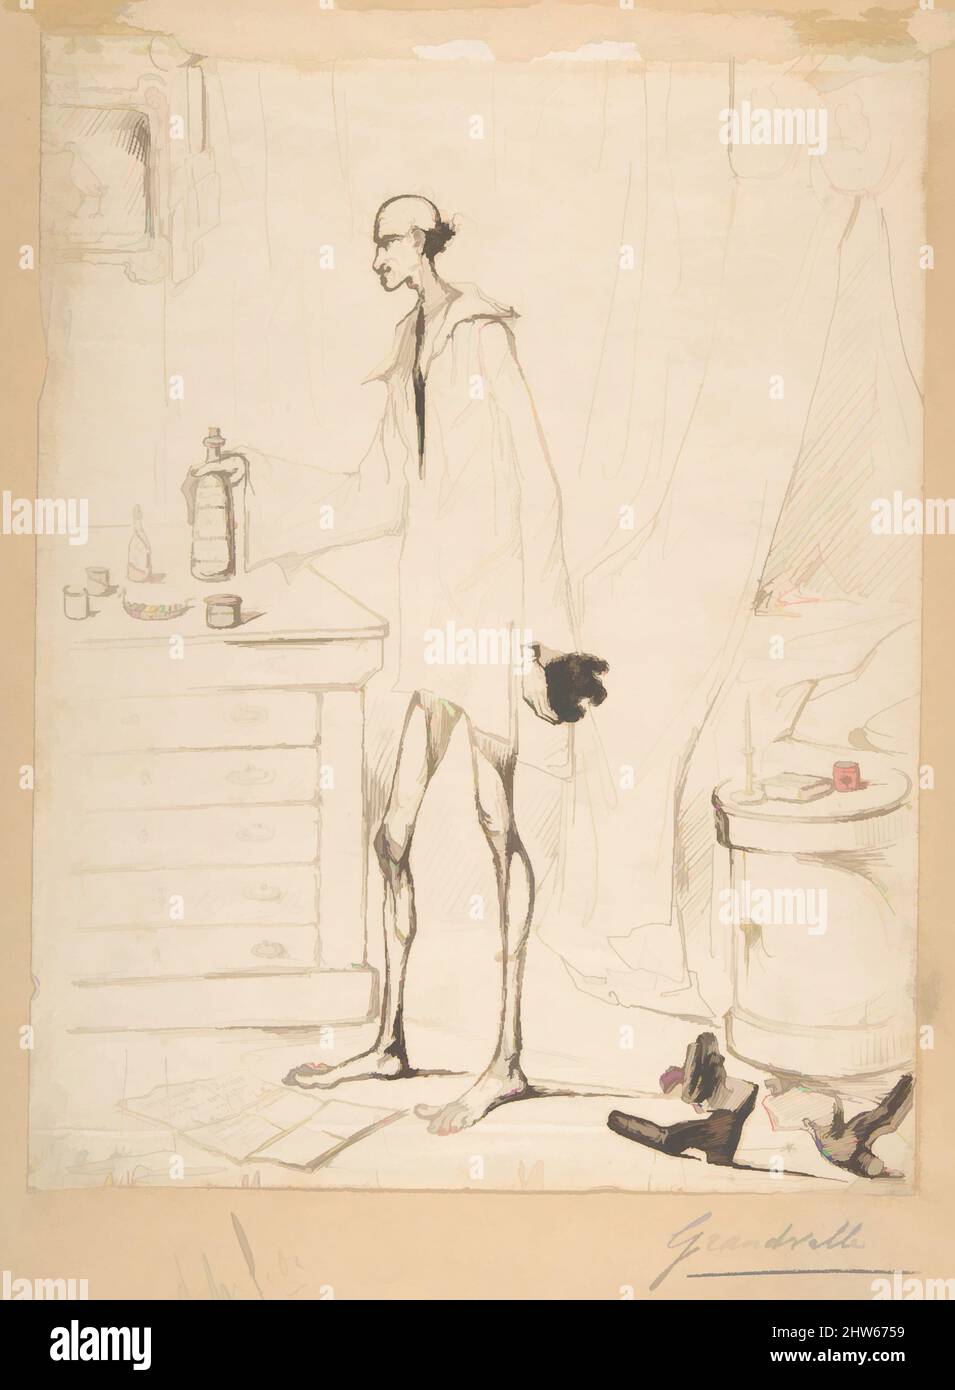 Art inspired by Man in a Nightshirt Reaching for a Bottle Labeled 'Fountain of Youth', 1803–47, Pen and brown ink on wove paper, laid down on brown wove paper, sheet: 11 7/8 x 9 3/16 in. (30.2 x 23.4 cm), Drawings, J. J. Grandville (French, Nancy 1803–1847 Vanves, Classic works modernized by Artotop with a splash of modernity. Shapes, color and value, eye-catching visual impact on art. Emotions through freedom of artworks in a contemporary way. A timeless message pursuing a wildly creative new direction. Artists turning to the digital medium and creating the Artotop NFT Stock Photo